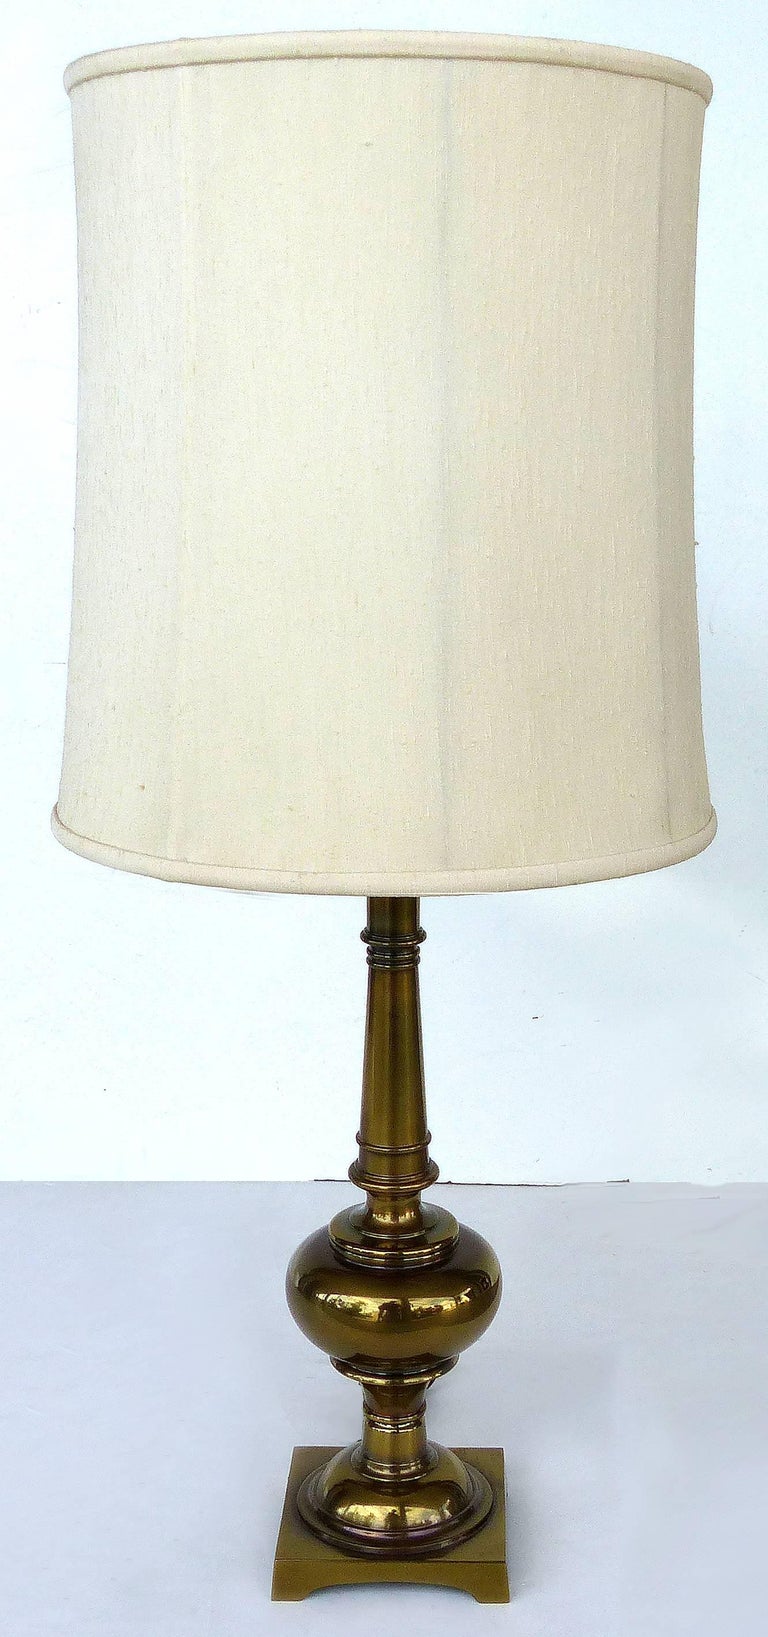 Pair of Stiffel Brass Table Lamps with Original Stiffel Shades For Sale 3